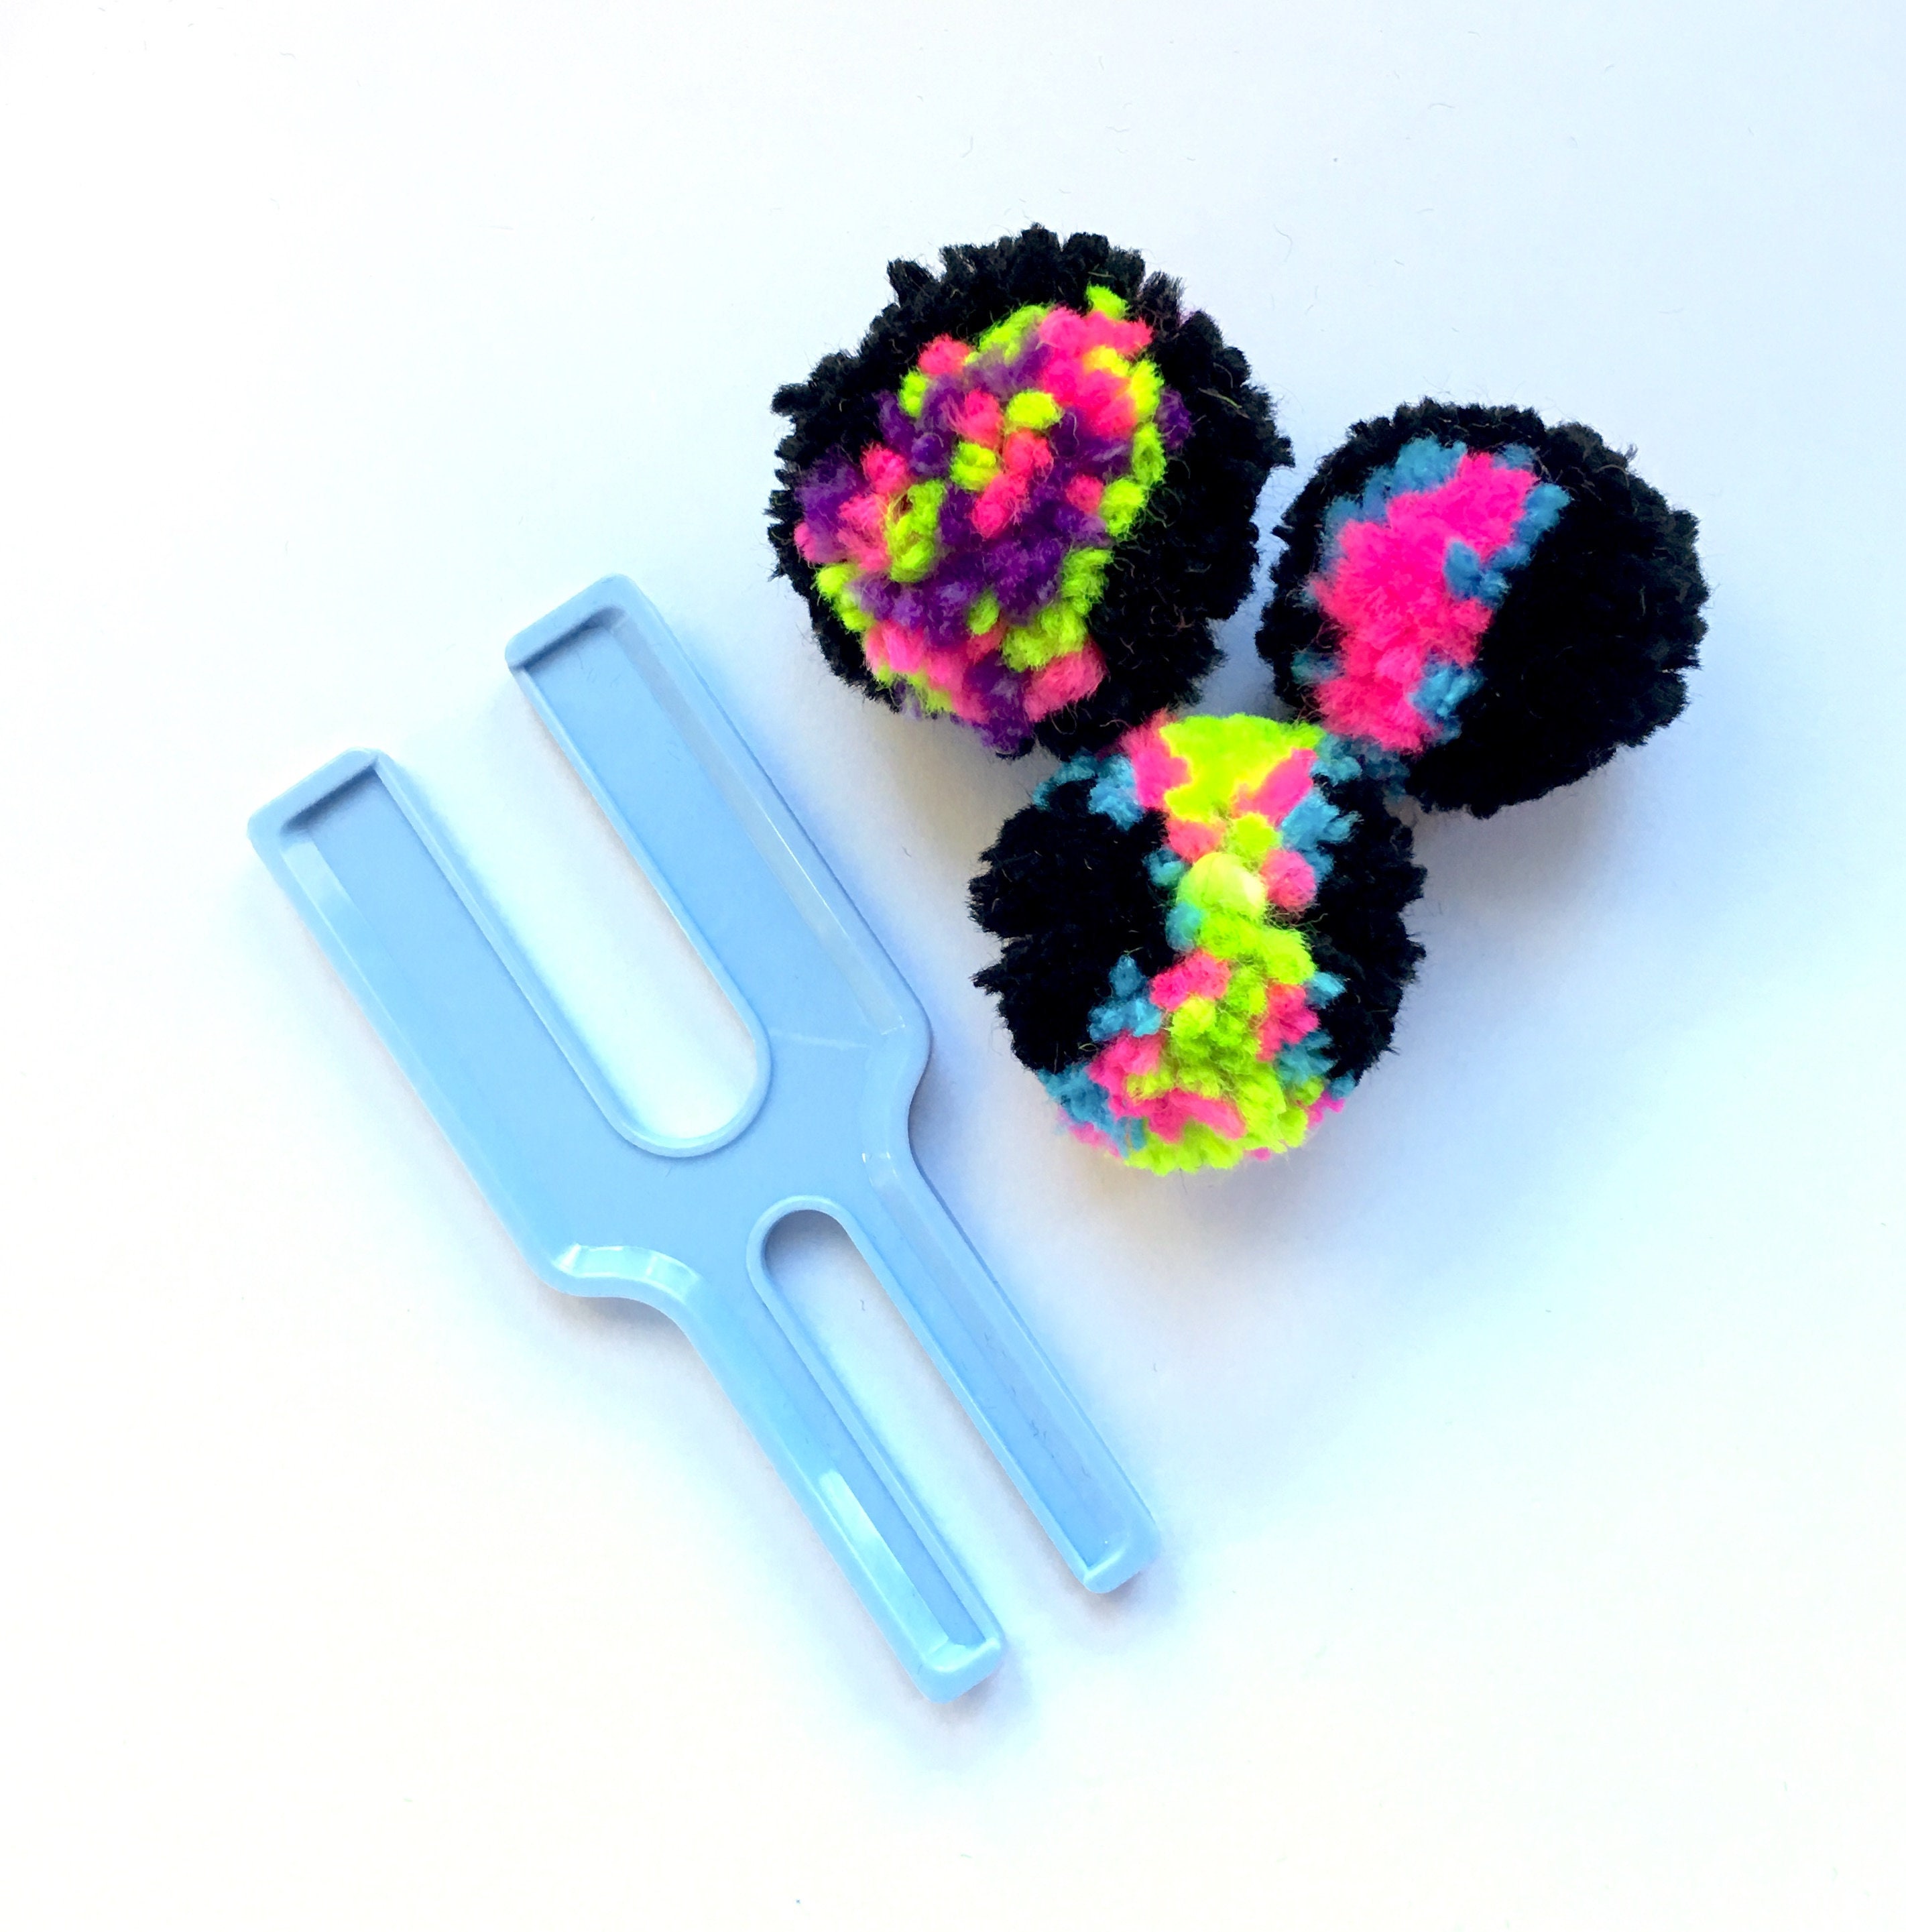 2-1/2 & 3-3/8 Pom Pom Makers by Clover Has 2 Sizes of Pom Pom Tools. Make  Solid or Multi Color Pom Wind, Cut, Tie, Fluff 3126 